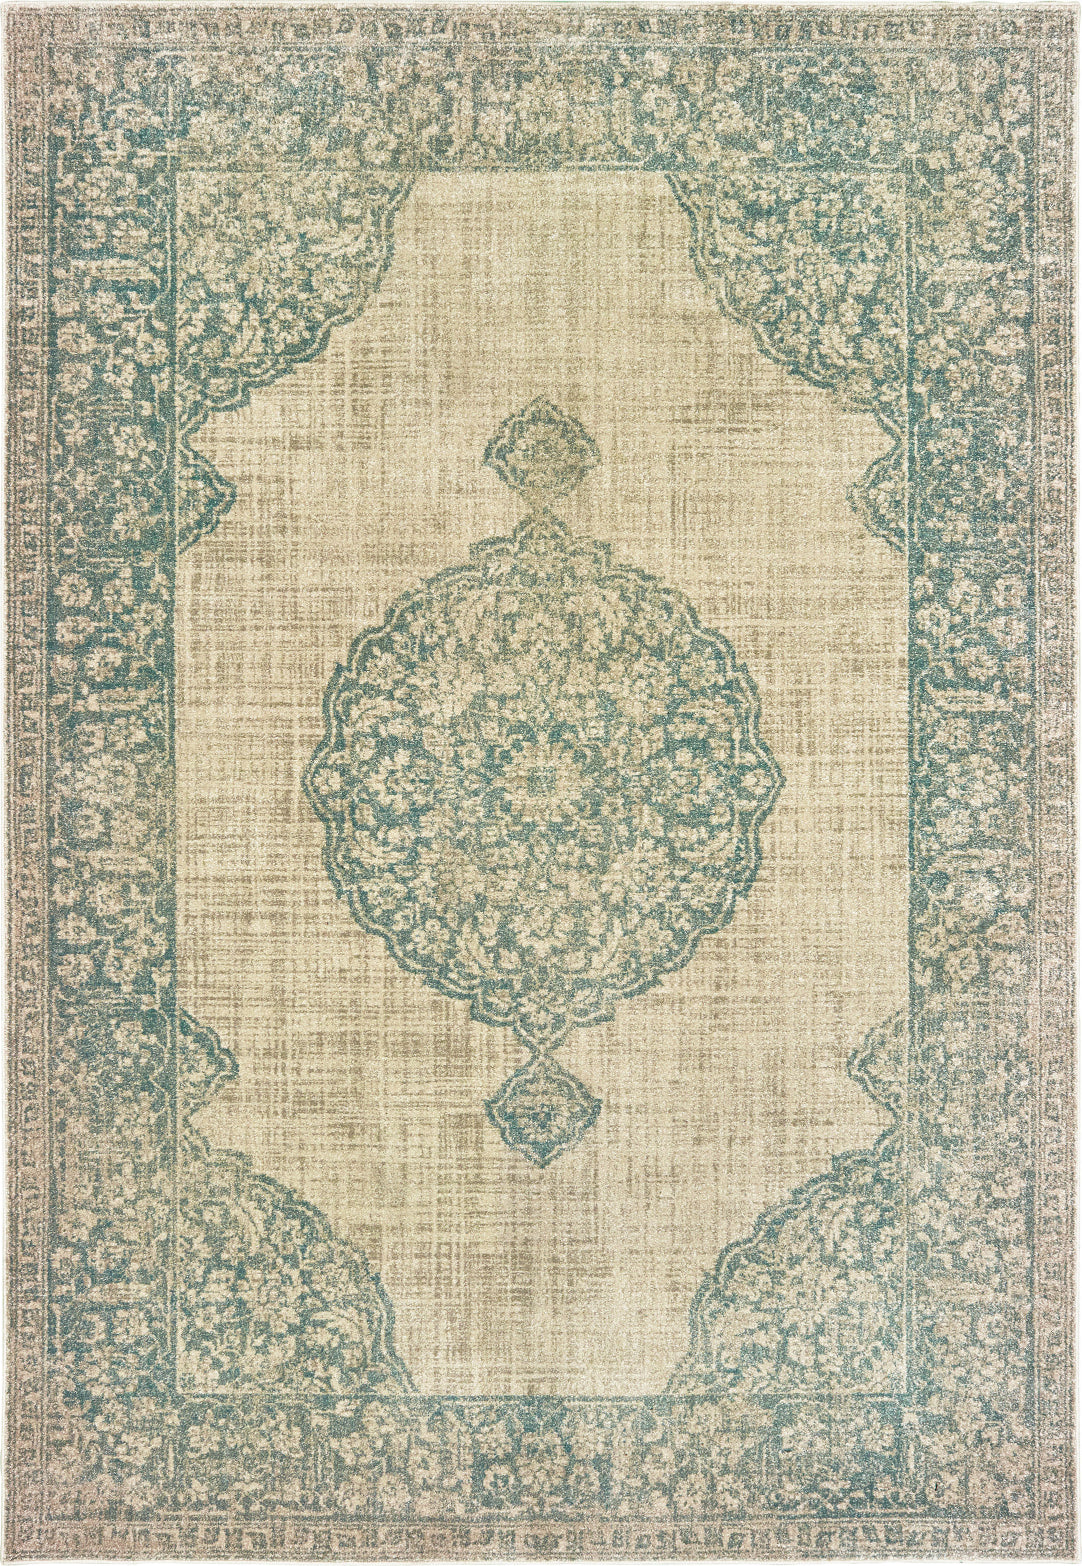 Oriental Weavers Raleigh 099J5 Ivory Blue Area Rug main image featured